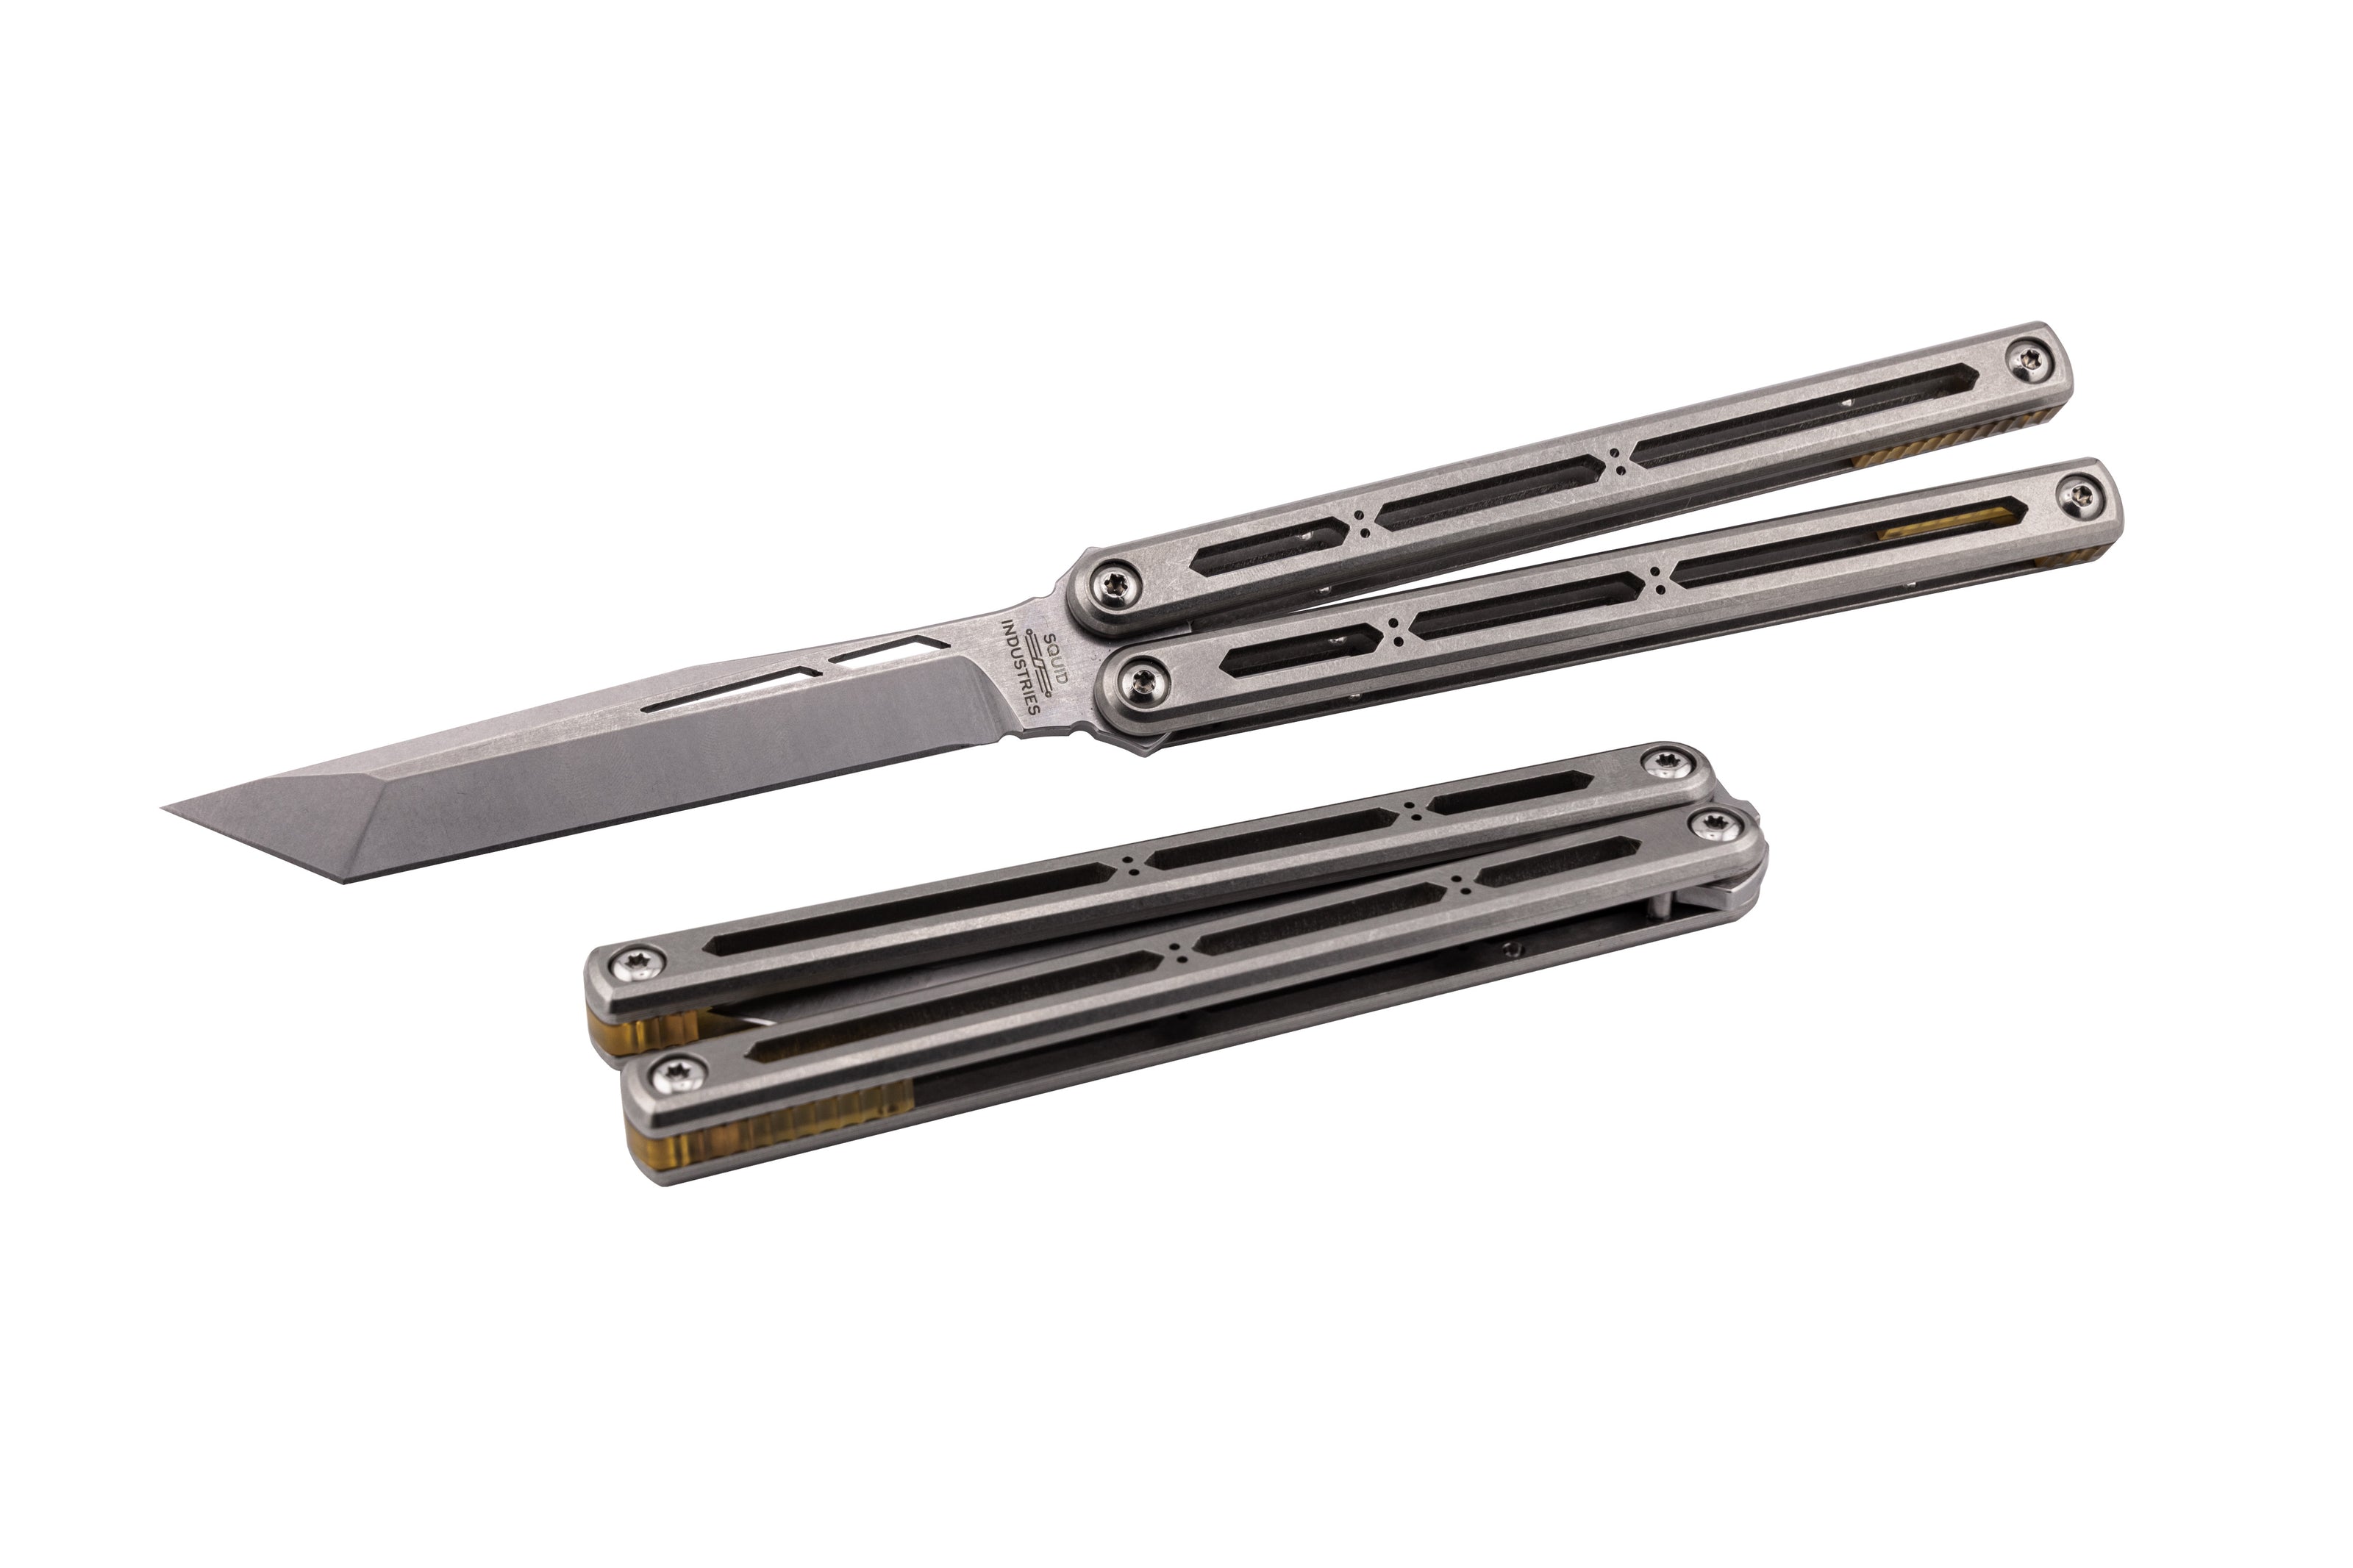 titanium hydro balisong butterfly knife trainer front open and closed position image